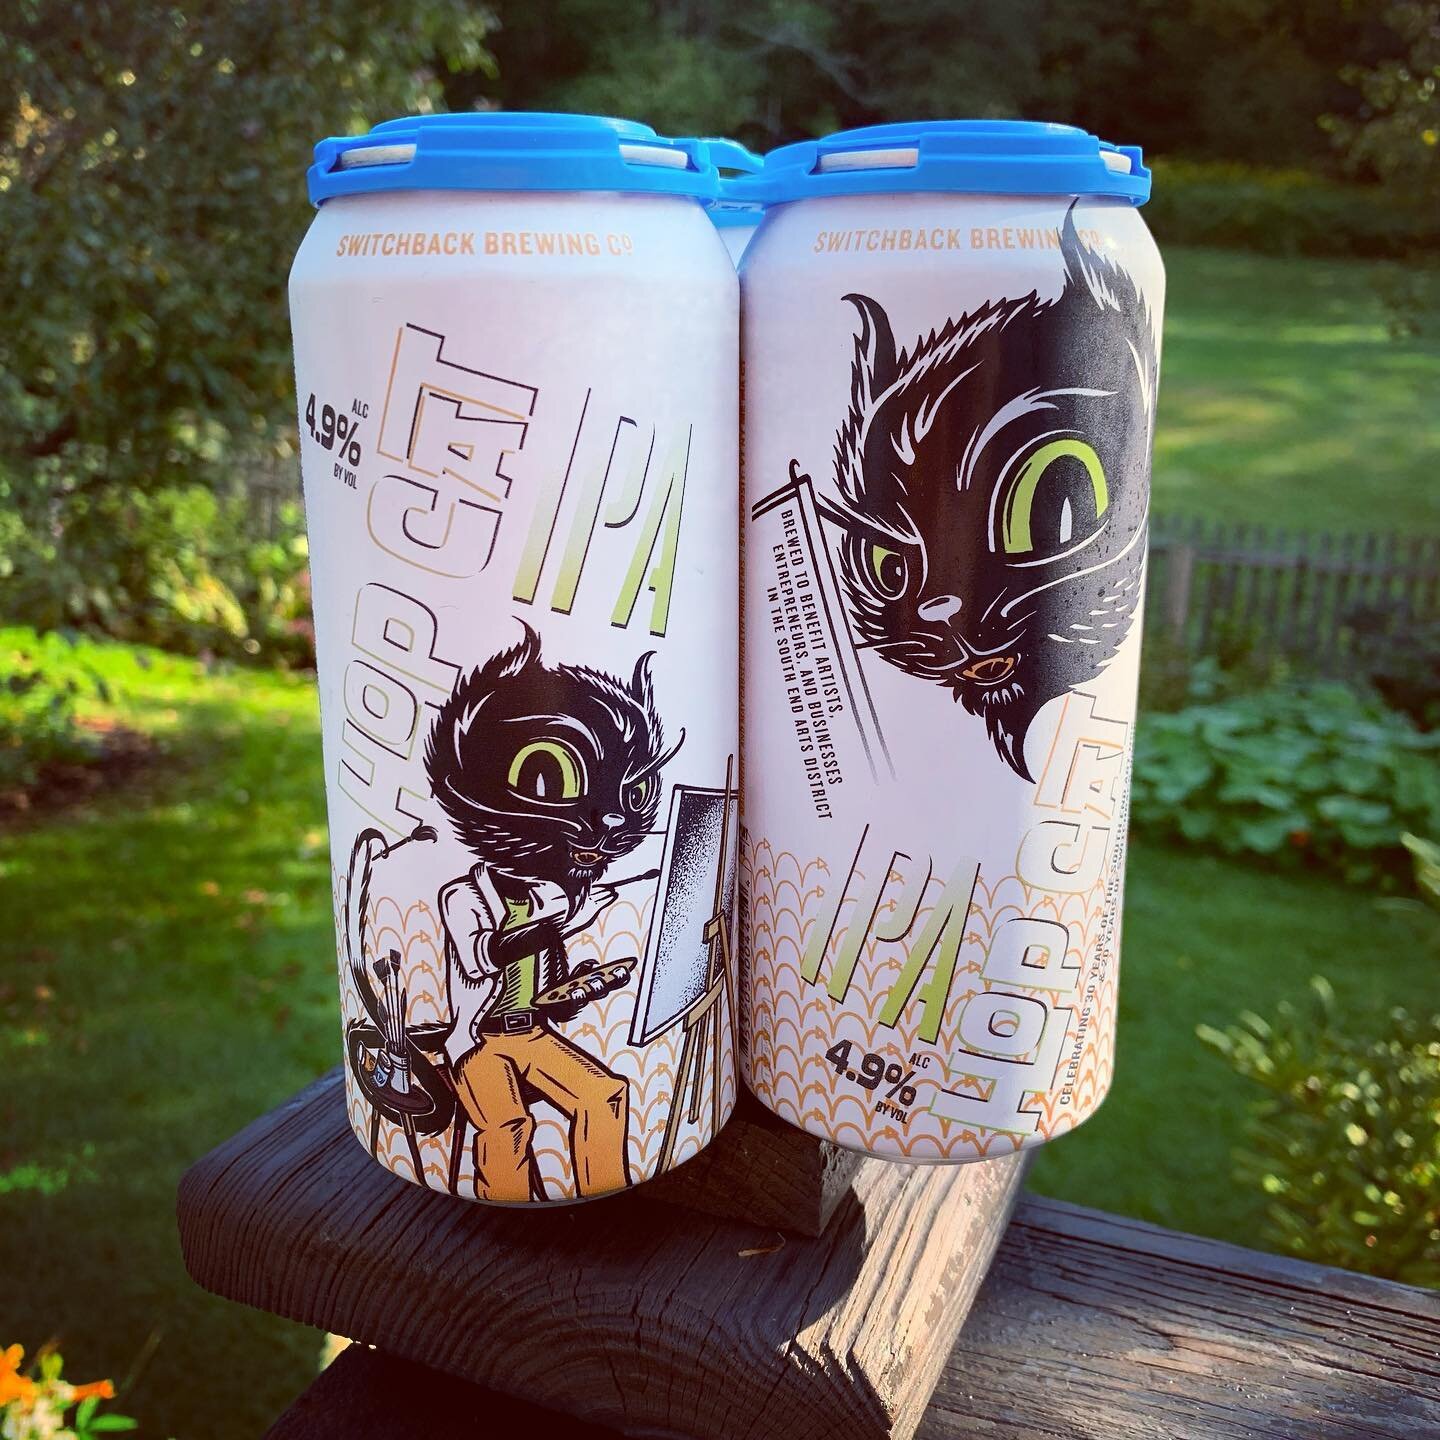 We had fun working on Hop Cat, a new Limited Edition IPA from @switchbackbeer, with another great illustration from @the_solekitchen, being released today in celebration and support of this year's @seabavt Art Hop!

25% of Hop Cat sales benefits arti